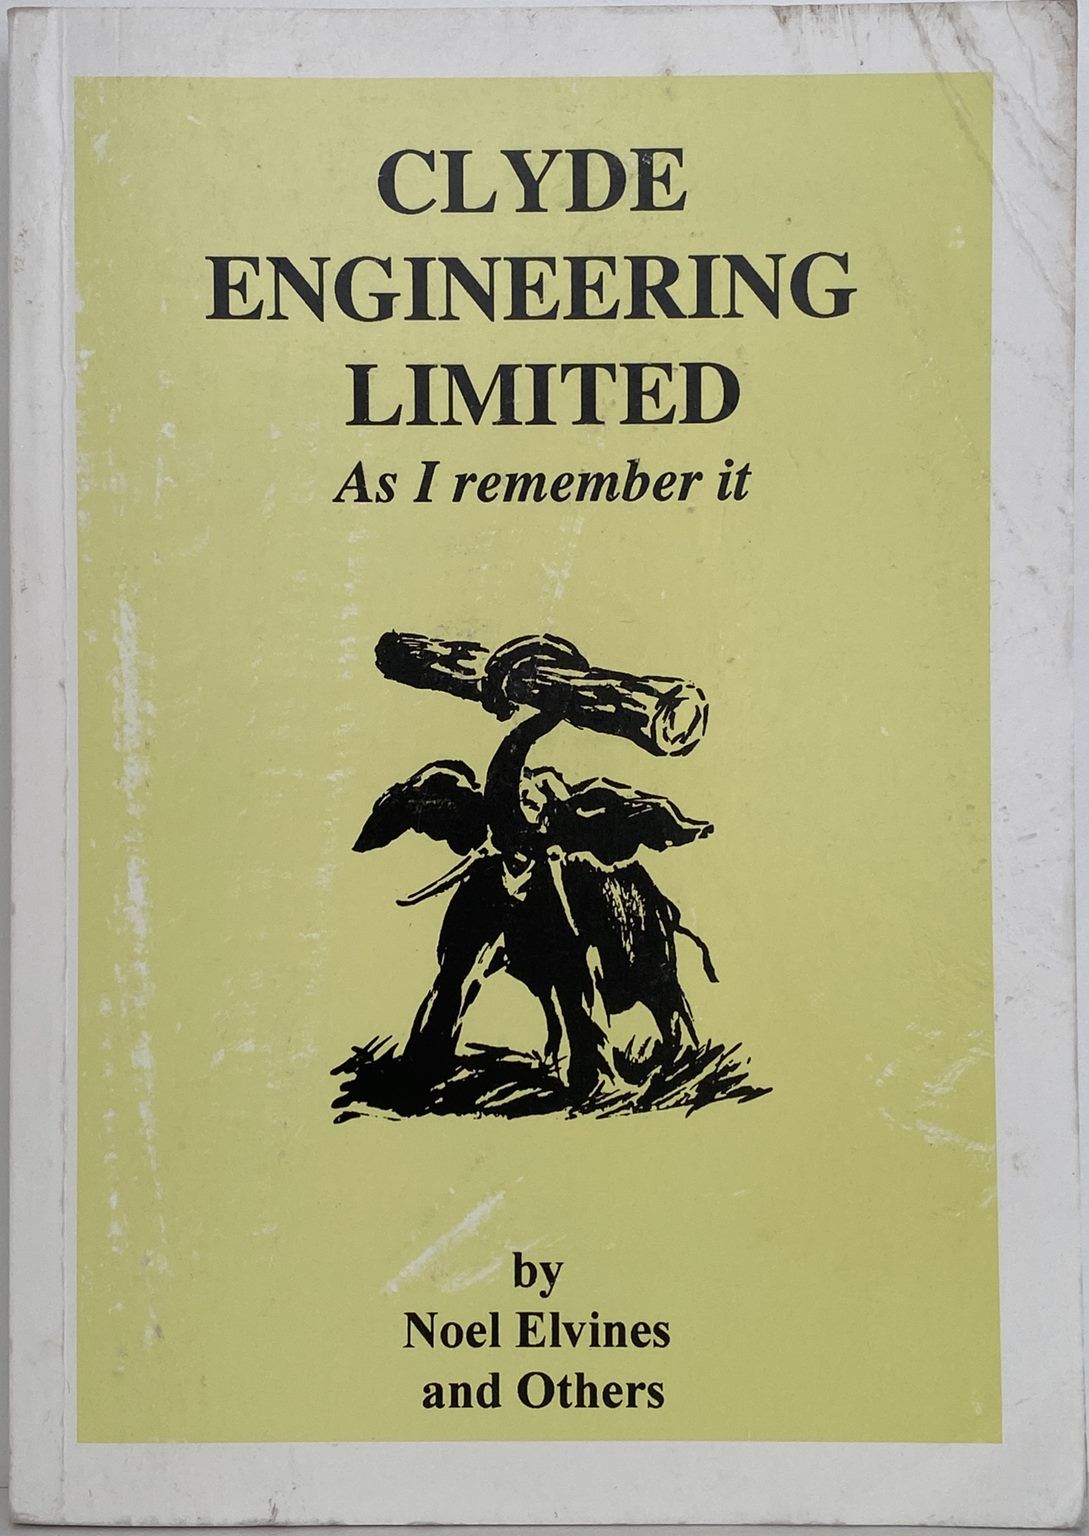 CLYDE ENGINEERING LIMITED: As I Remember It